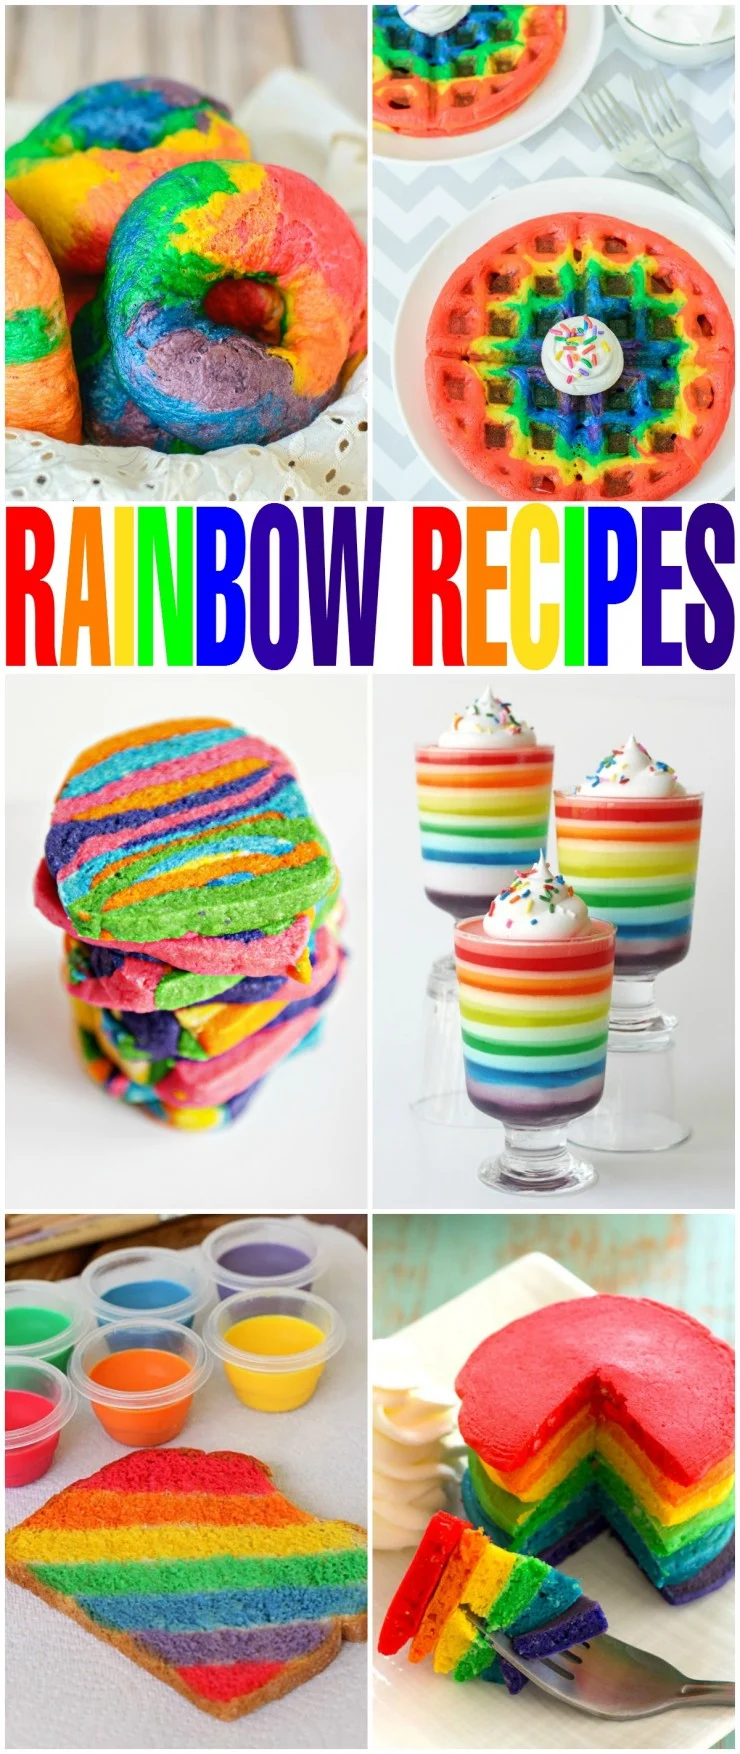 These 20 Vibrant Rainbow Recipes are just so much fun. These are some great ideas for St. Patrick's day celebrations or just because fun for kids!